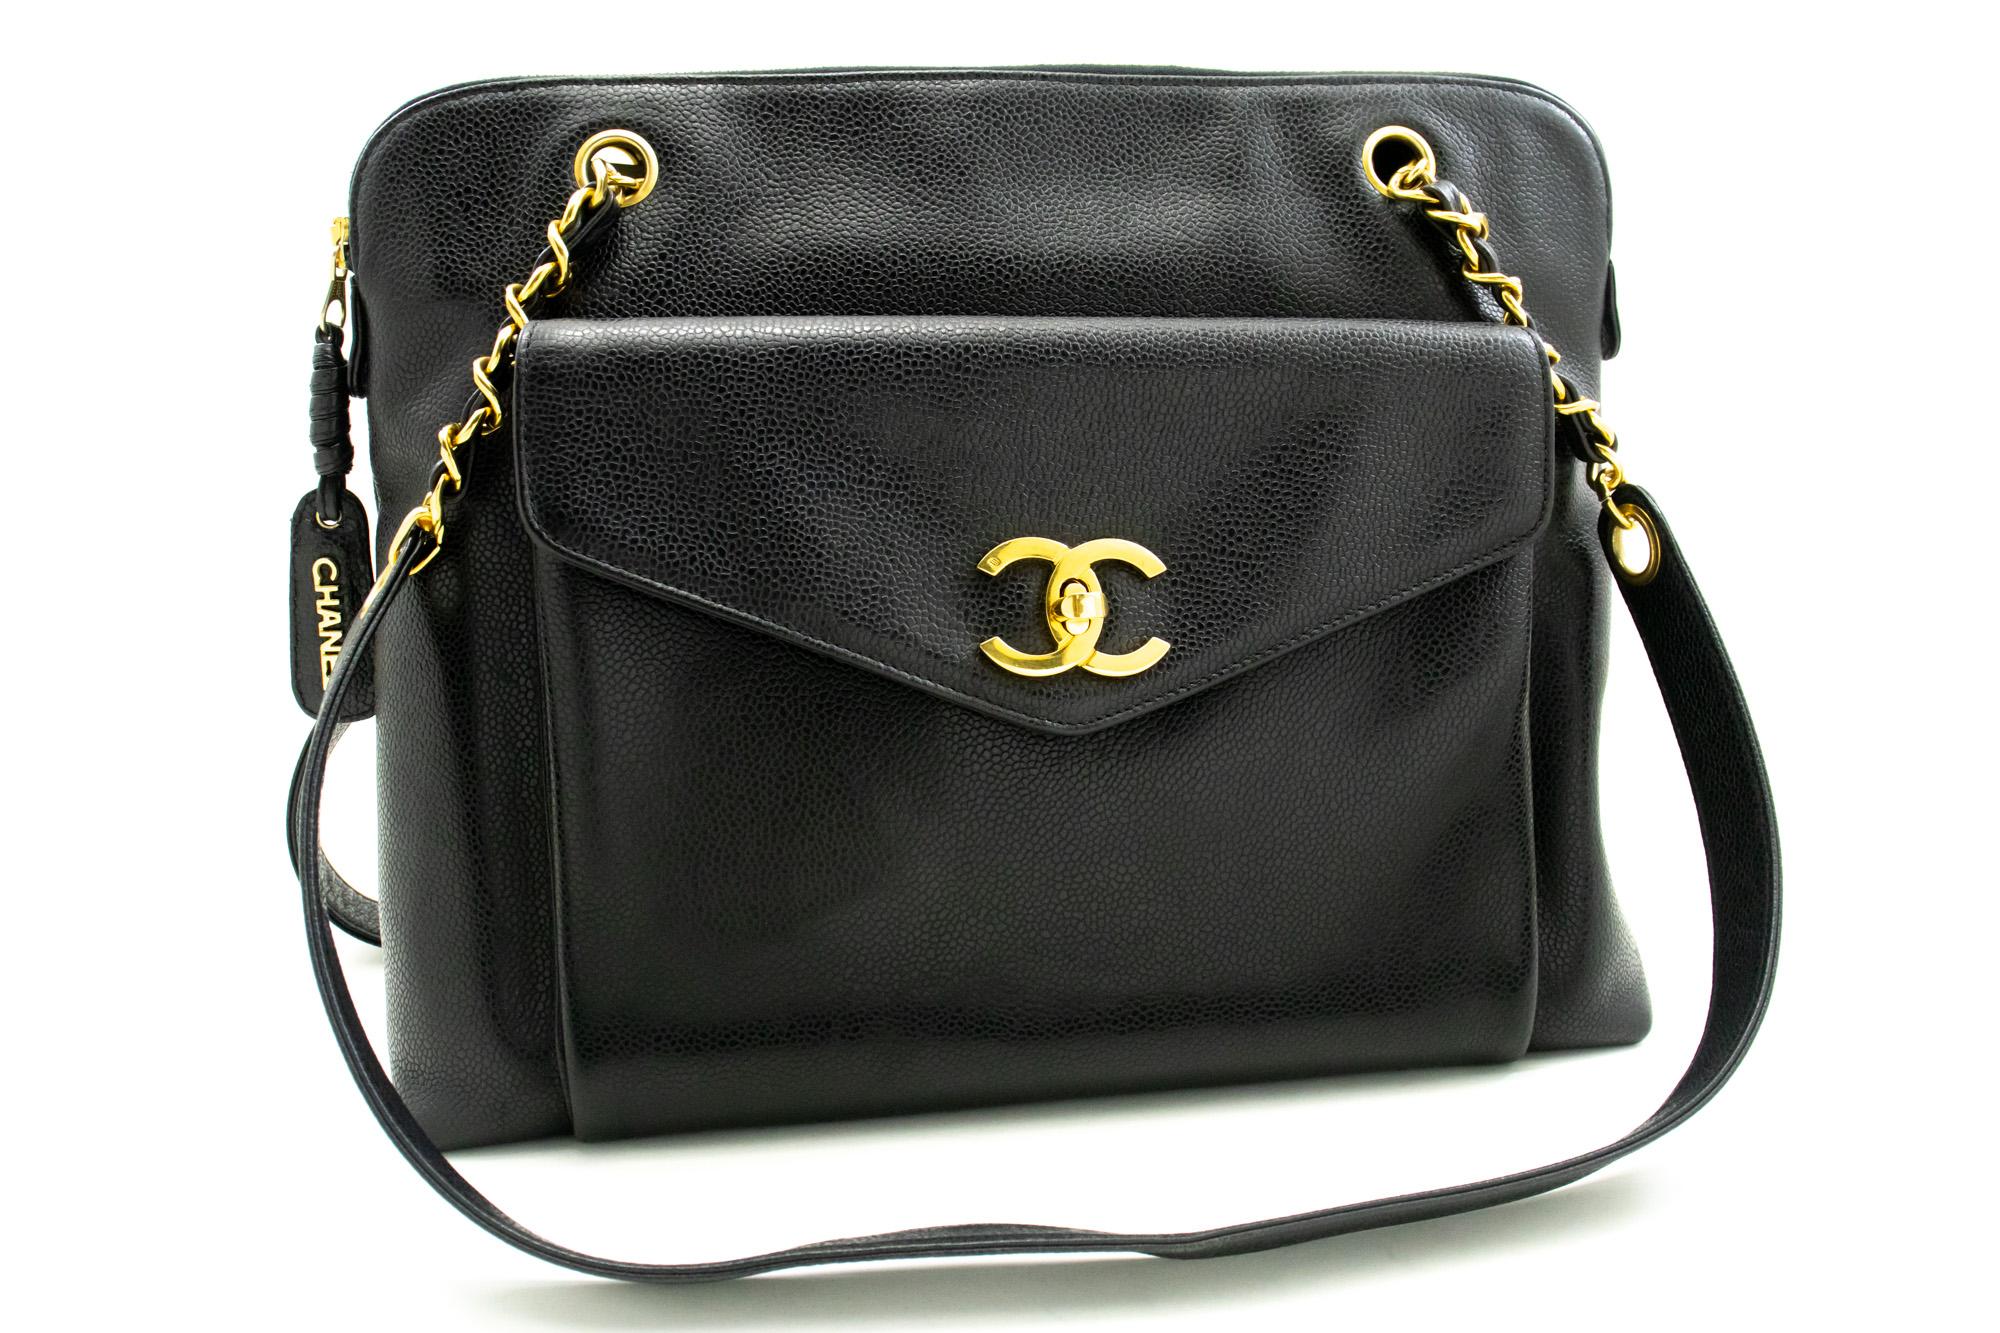 An authentic CHANEL Caviar Large Chain Shoulder Bag Black Leather Gold Zipper. The color is Black. The outside material is Leather. The pattern is Solid. This item is Vintage / Classic. The year of manufacture would be 1994-1996.
Conditions &